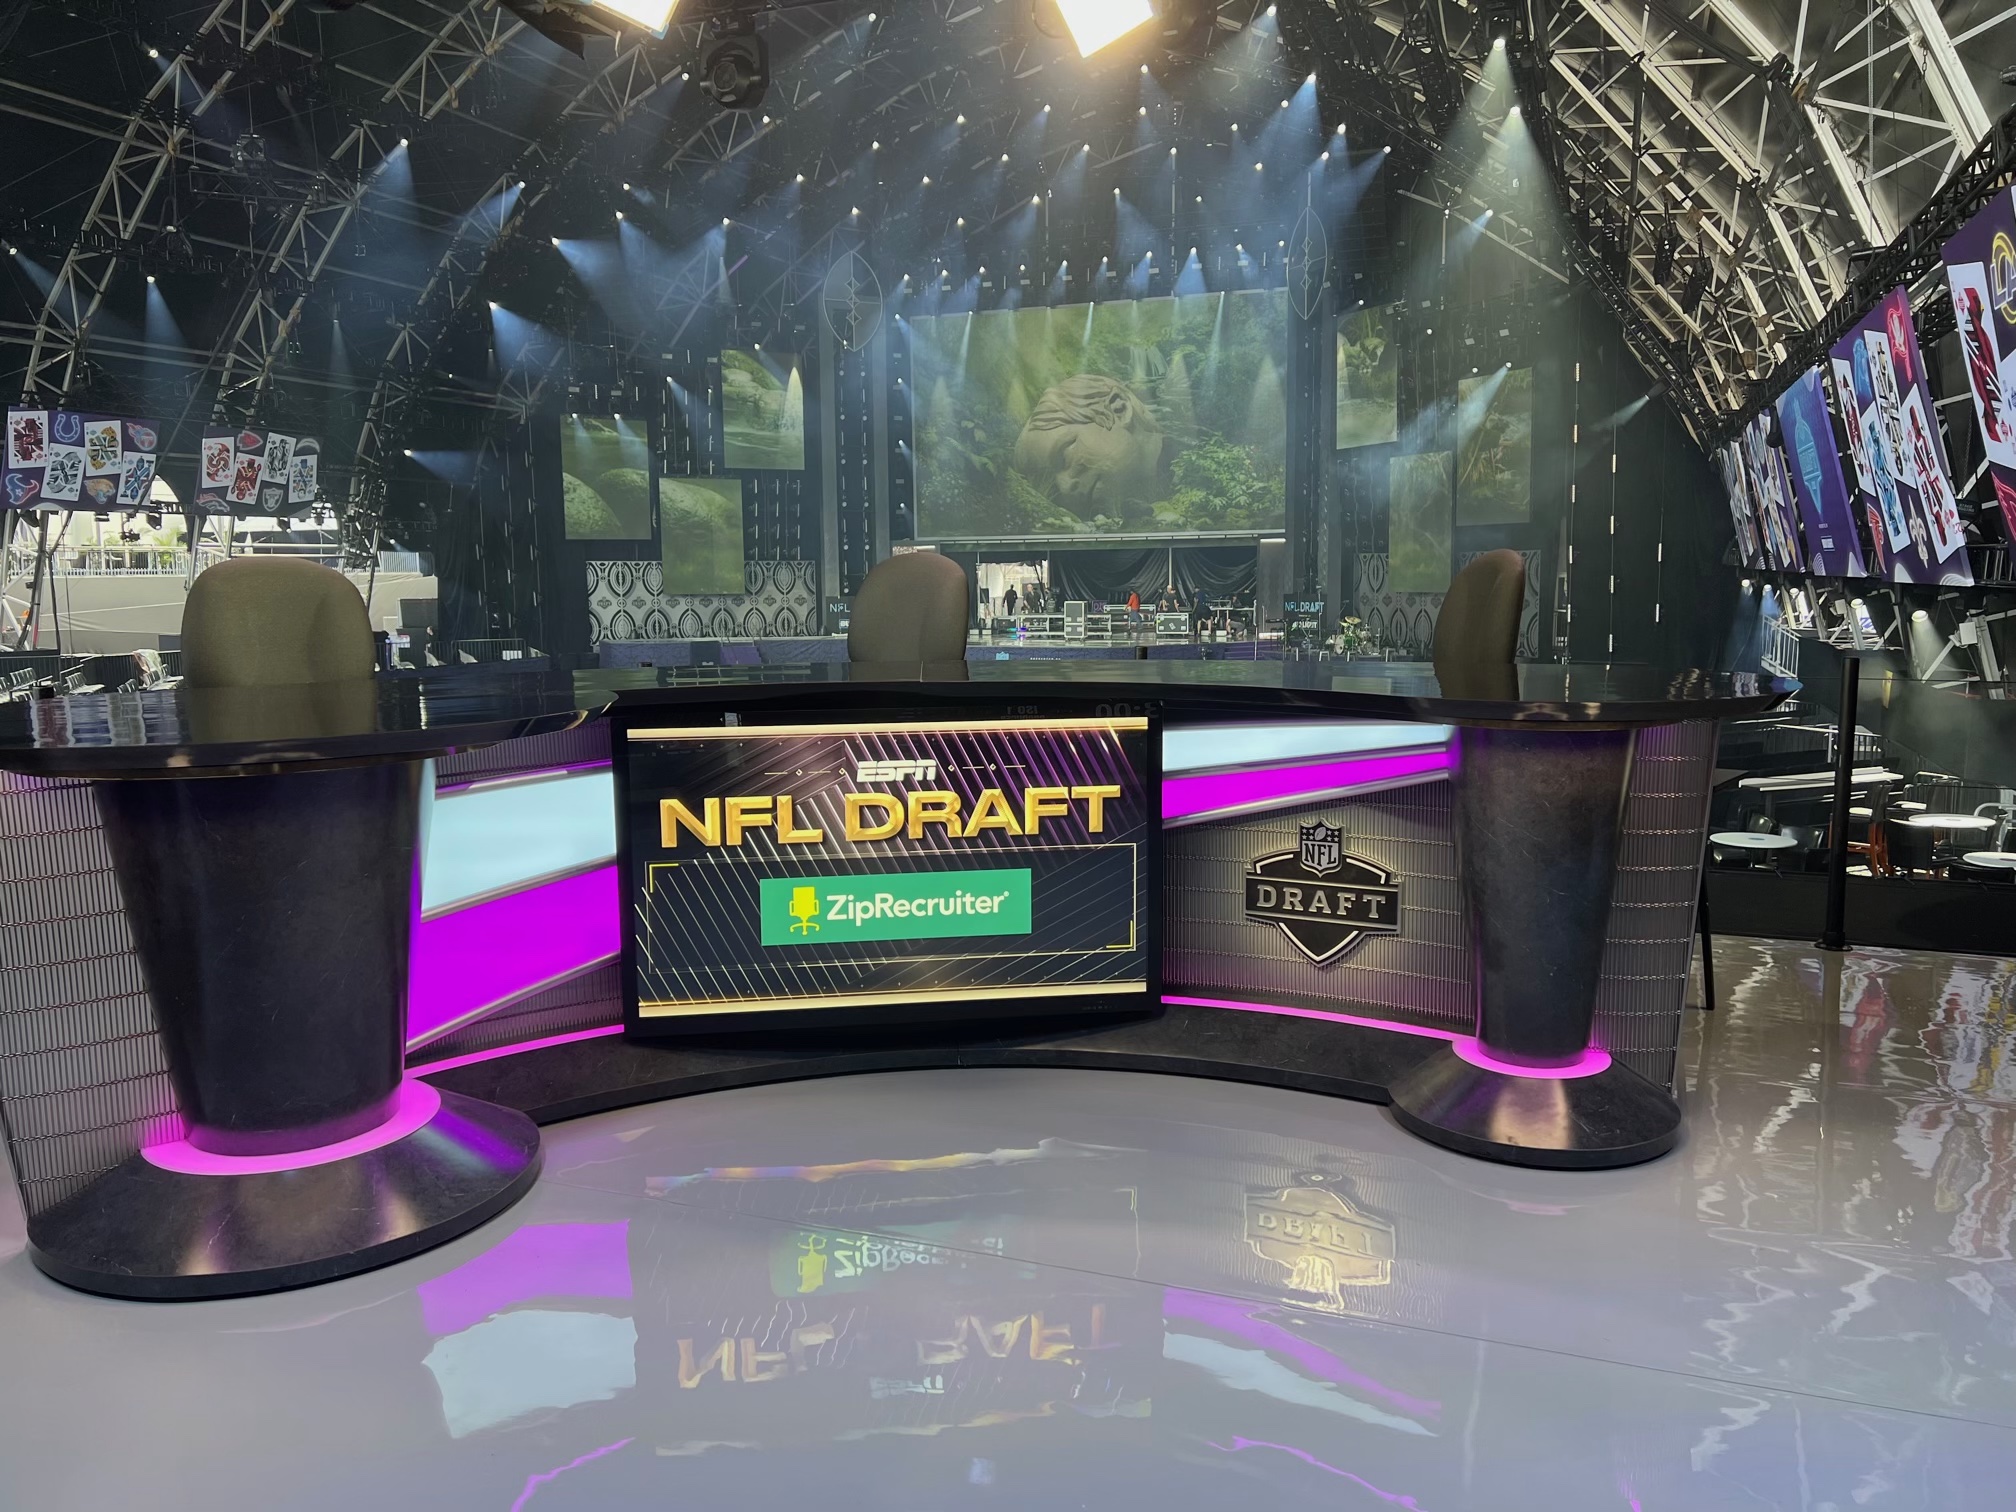 Live From 2022 NFL Draft: ESPN Goes All-In on Three-Day Party in